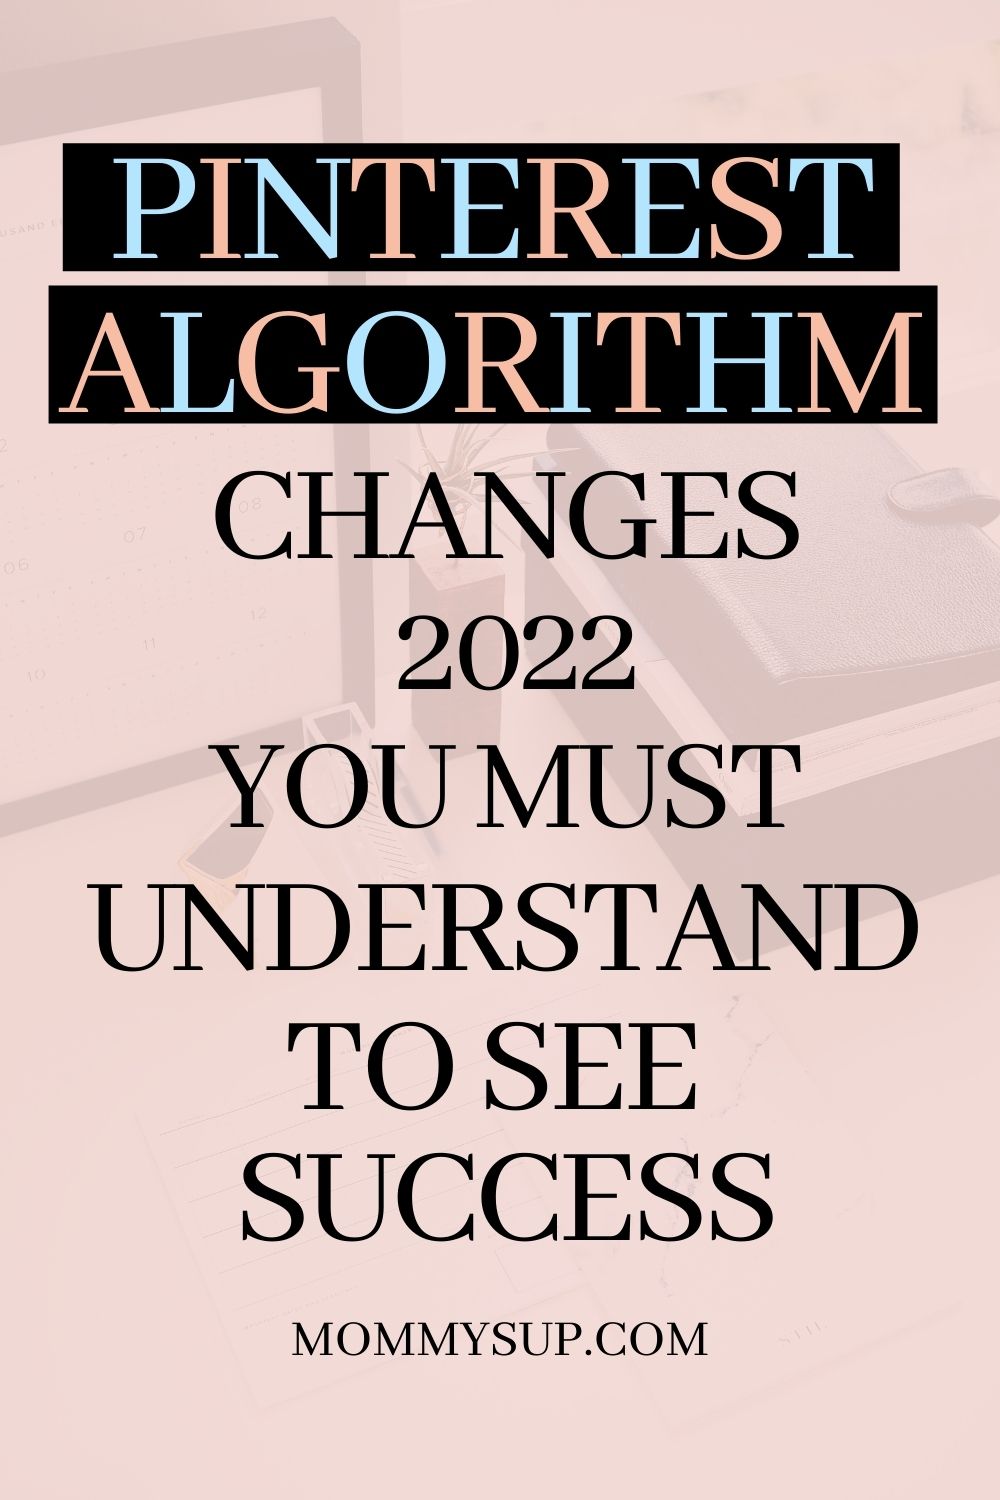 Pinterest Algorithm in 2022: understand it to see success